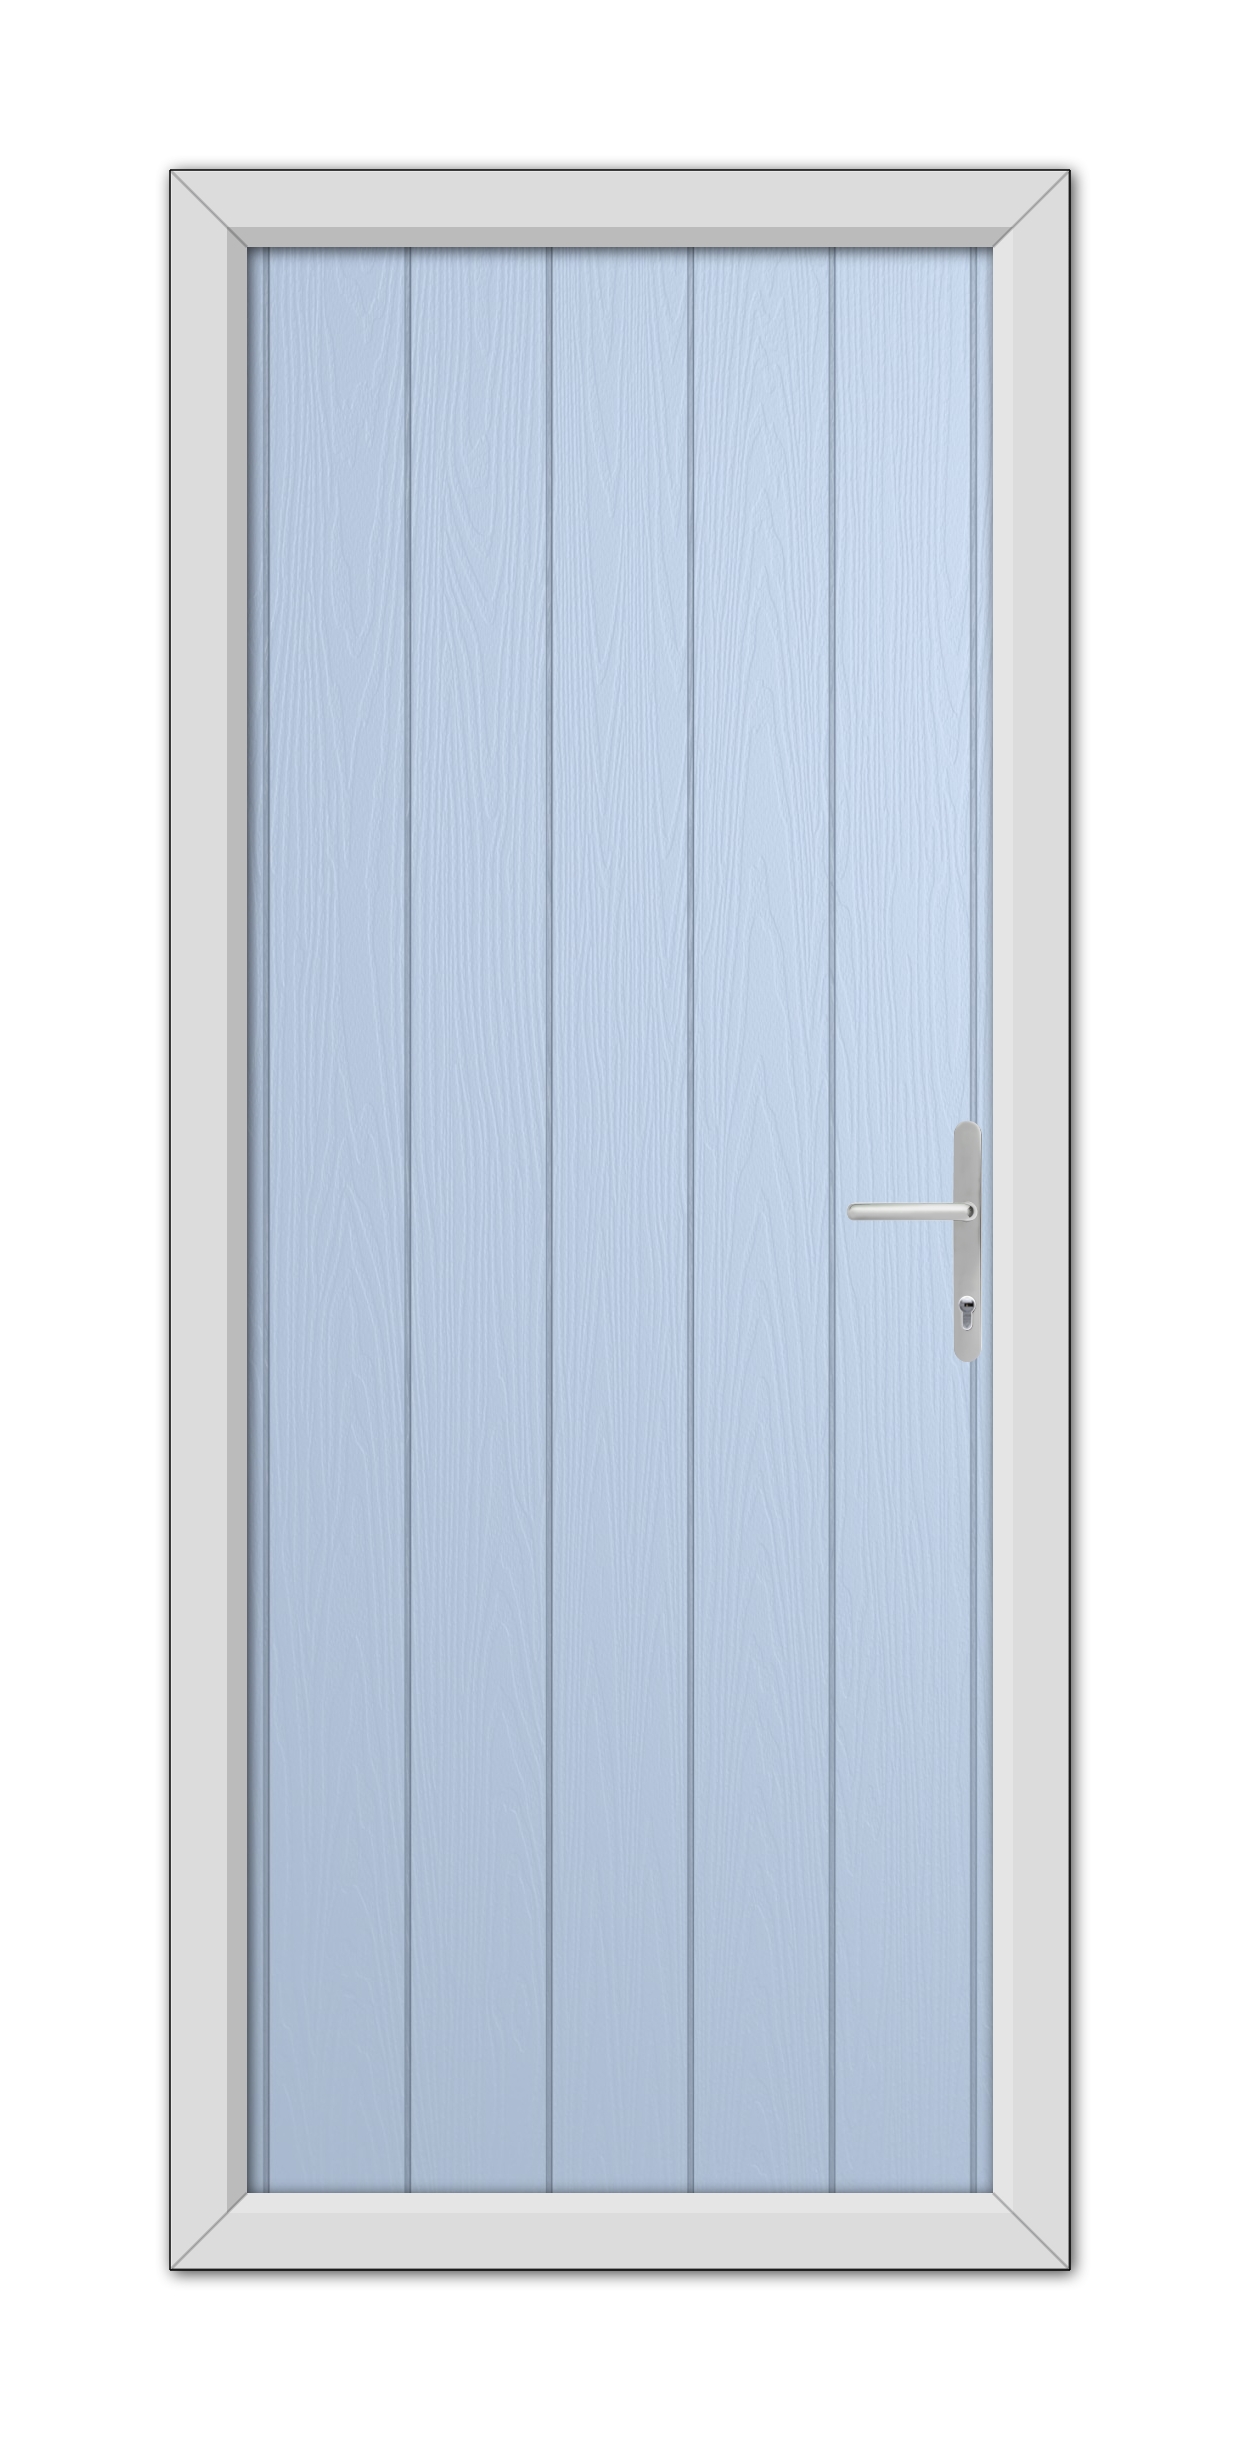 A Duck Egg Blue Norfolk Solid Composite Door with a silver handle, set within a white door frame.